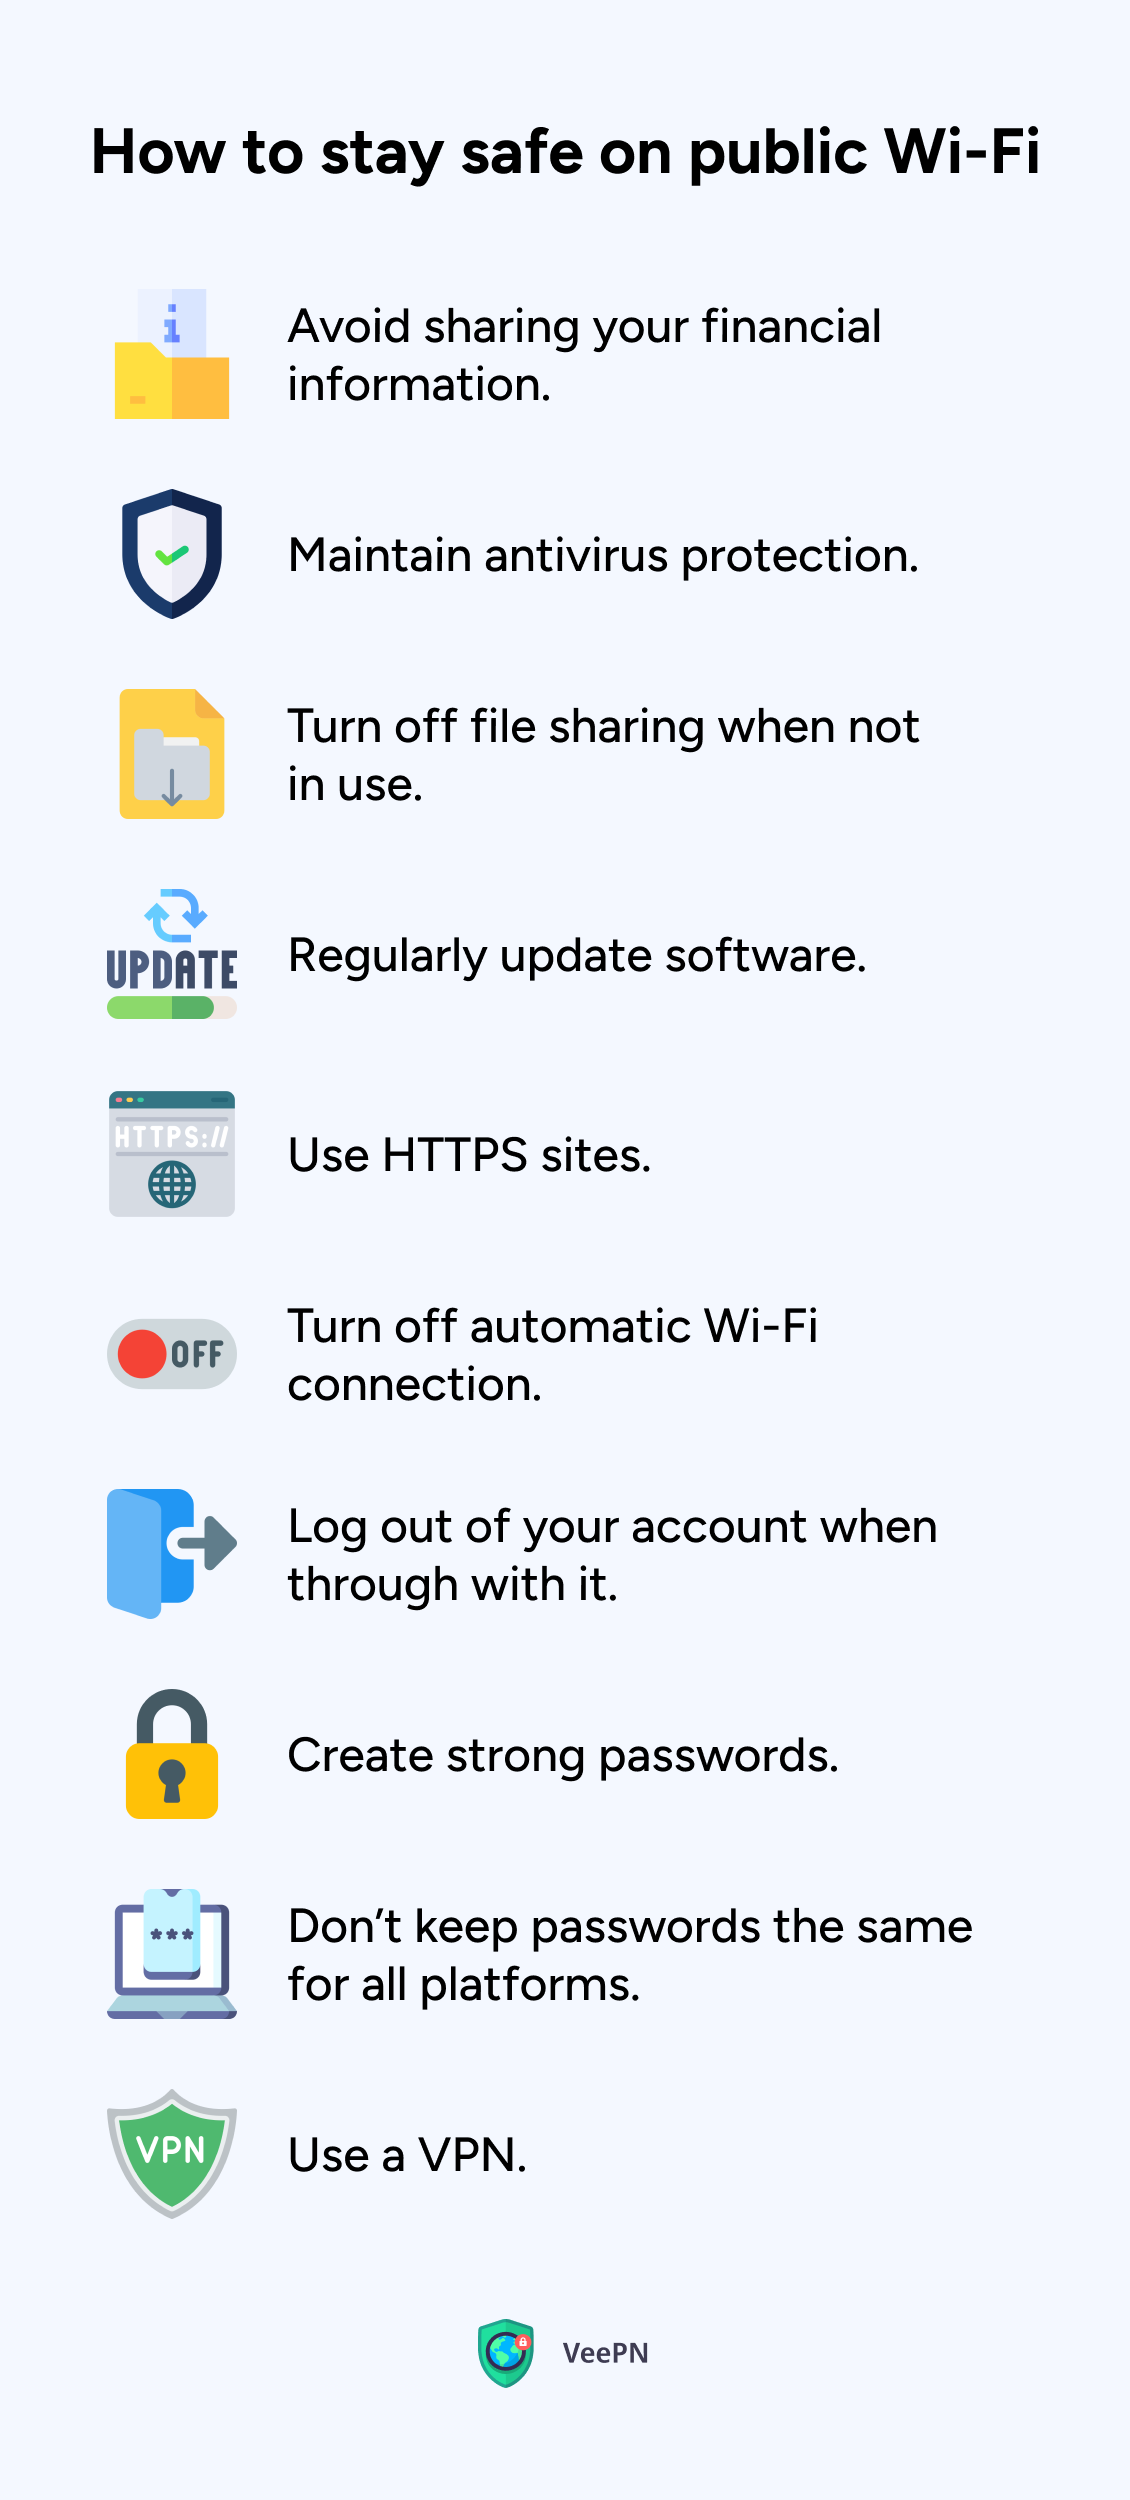 How to be secure on public Wi-Fi